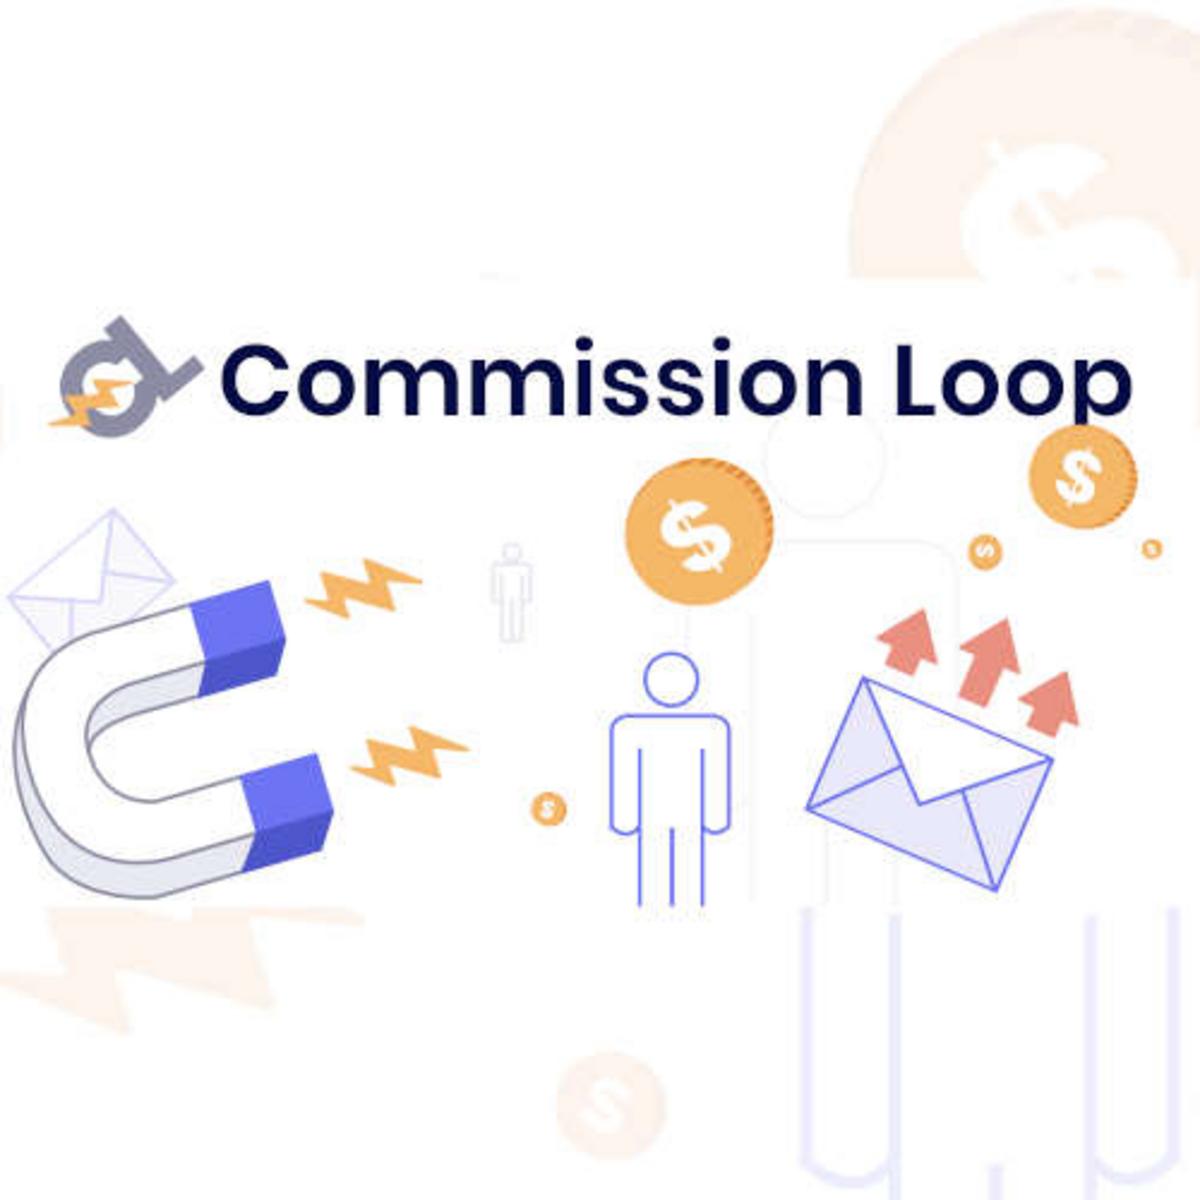 Commission Loop System